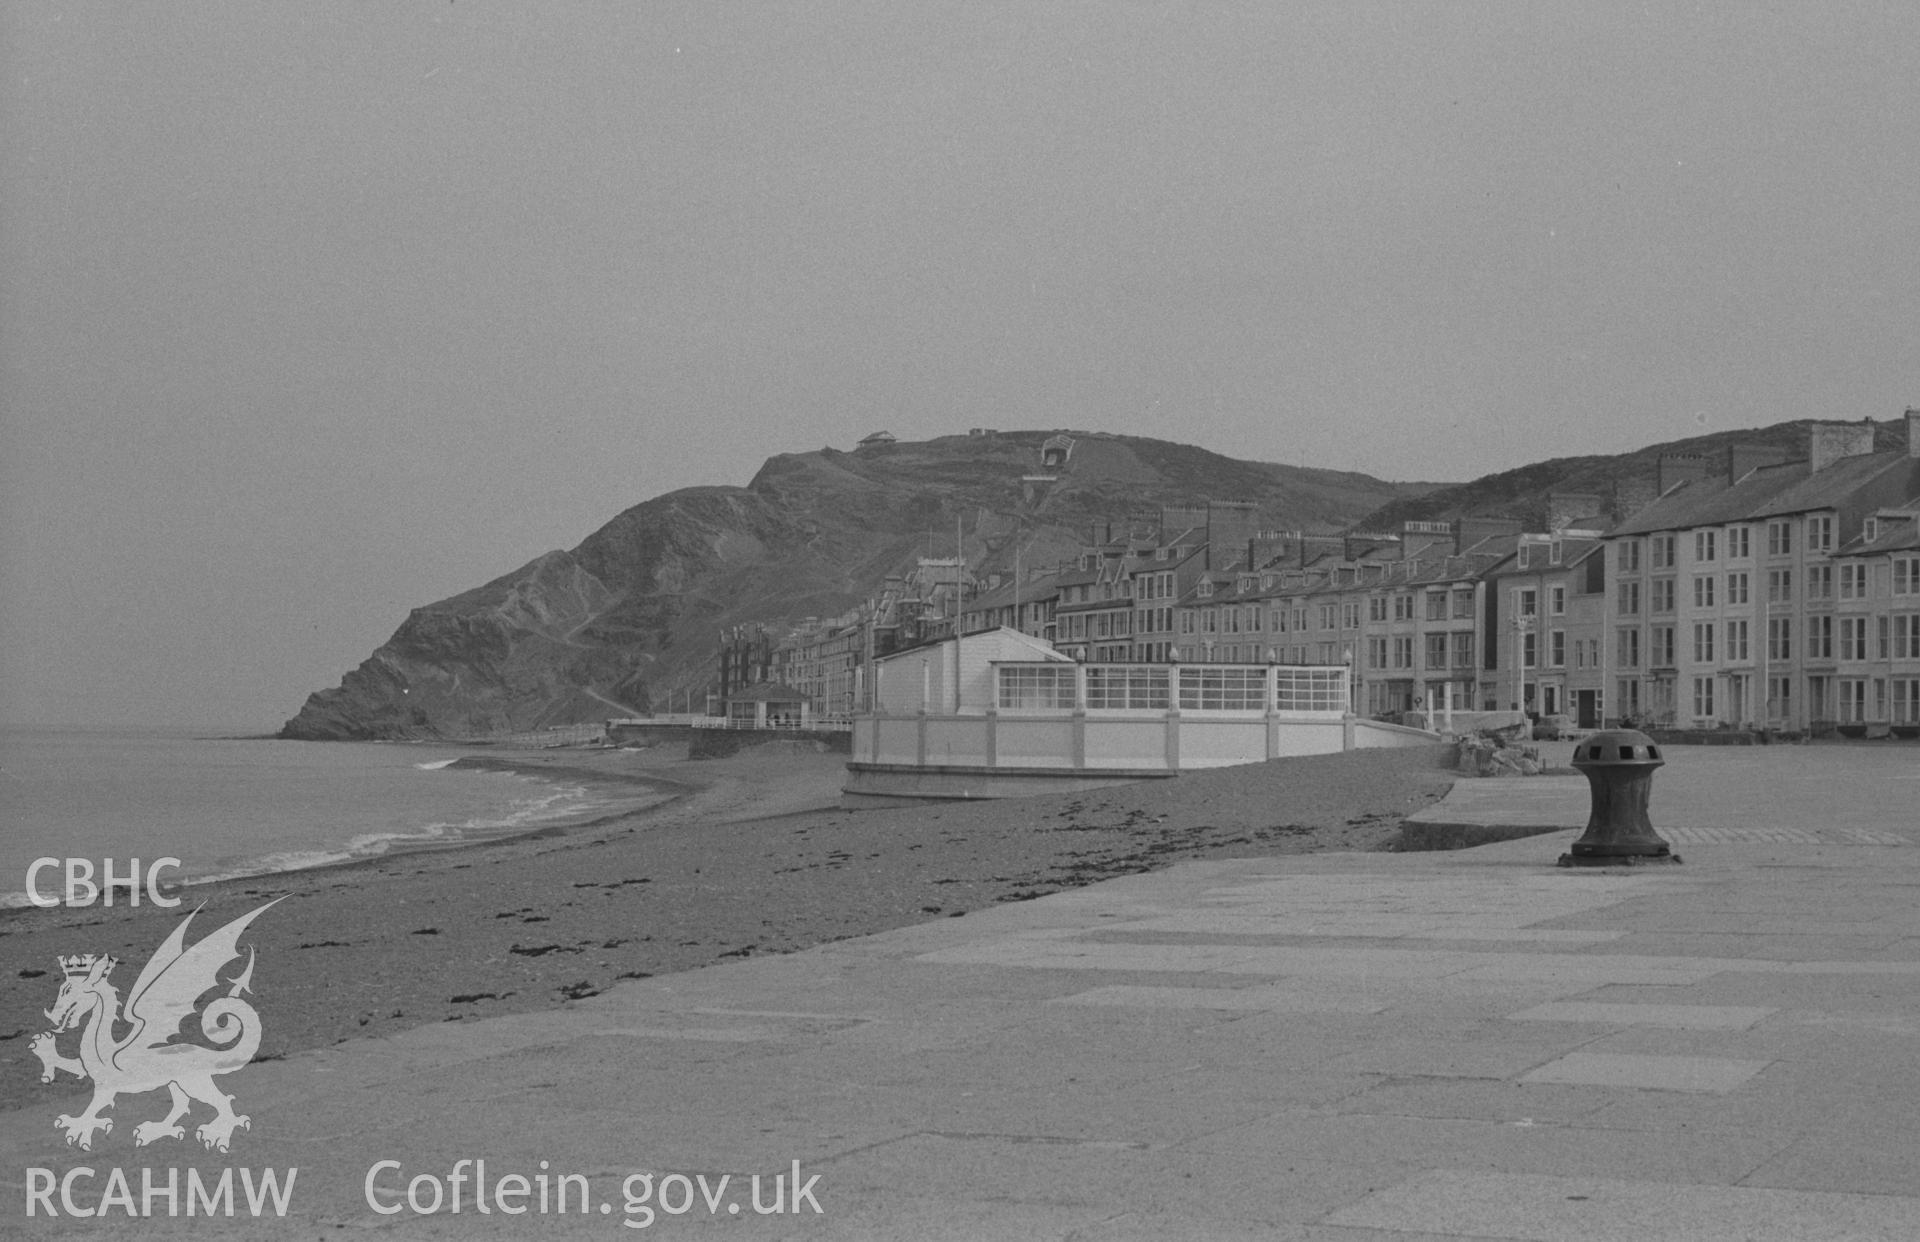 Digital copy of a black and white negative showing the promenade, grandstand and Constitution Hill with capstan in the foreground. Photographed by Arthur O. Chater on 13th April 1967 looking north from Grid Reference SN 583 818.